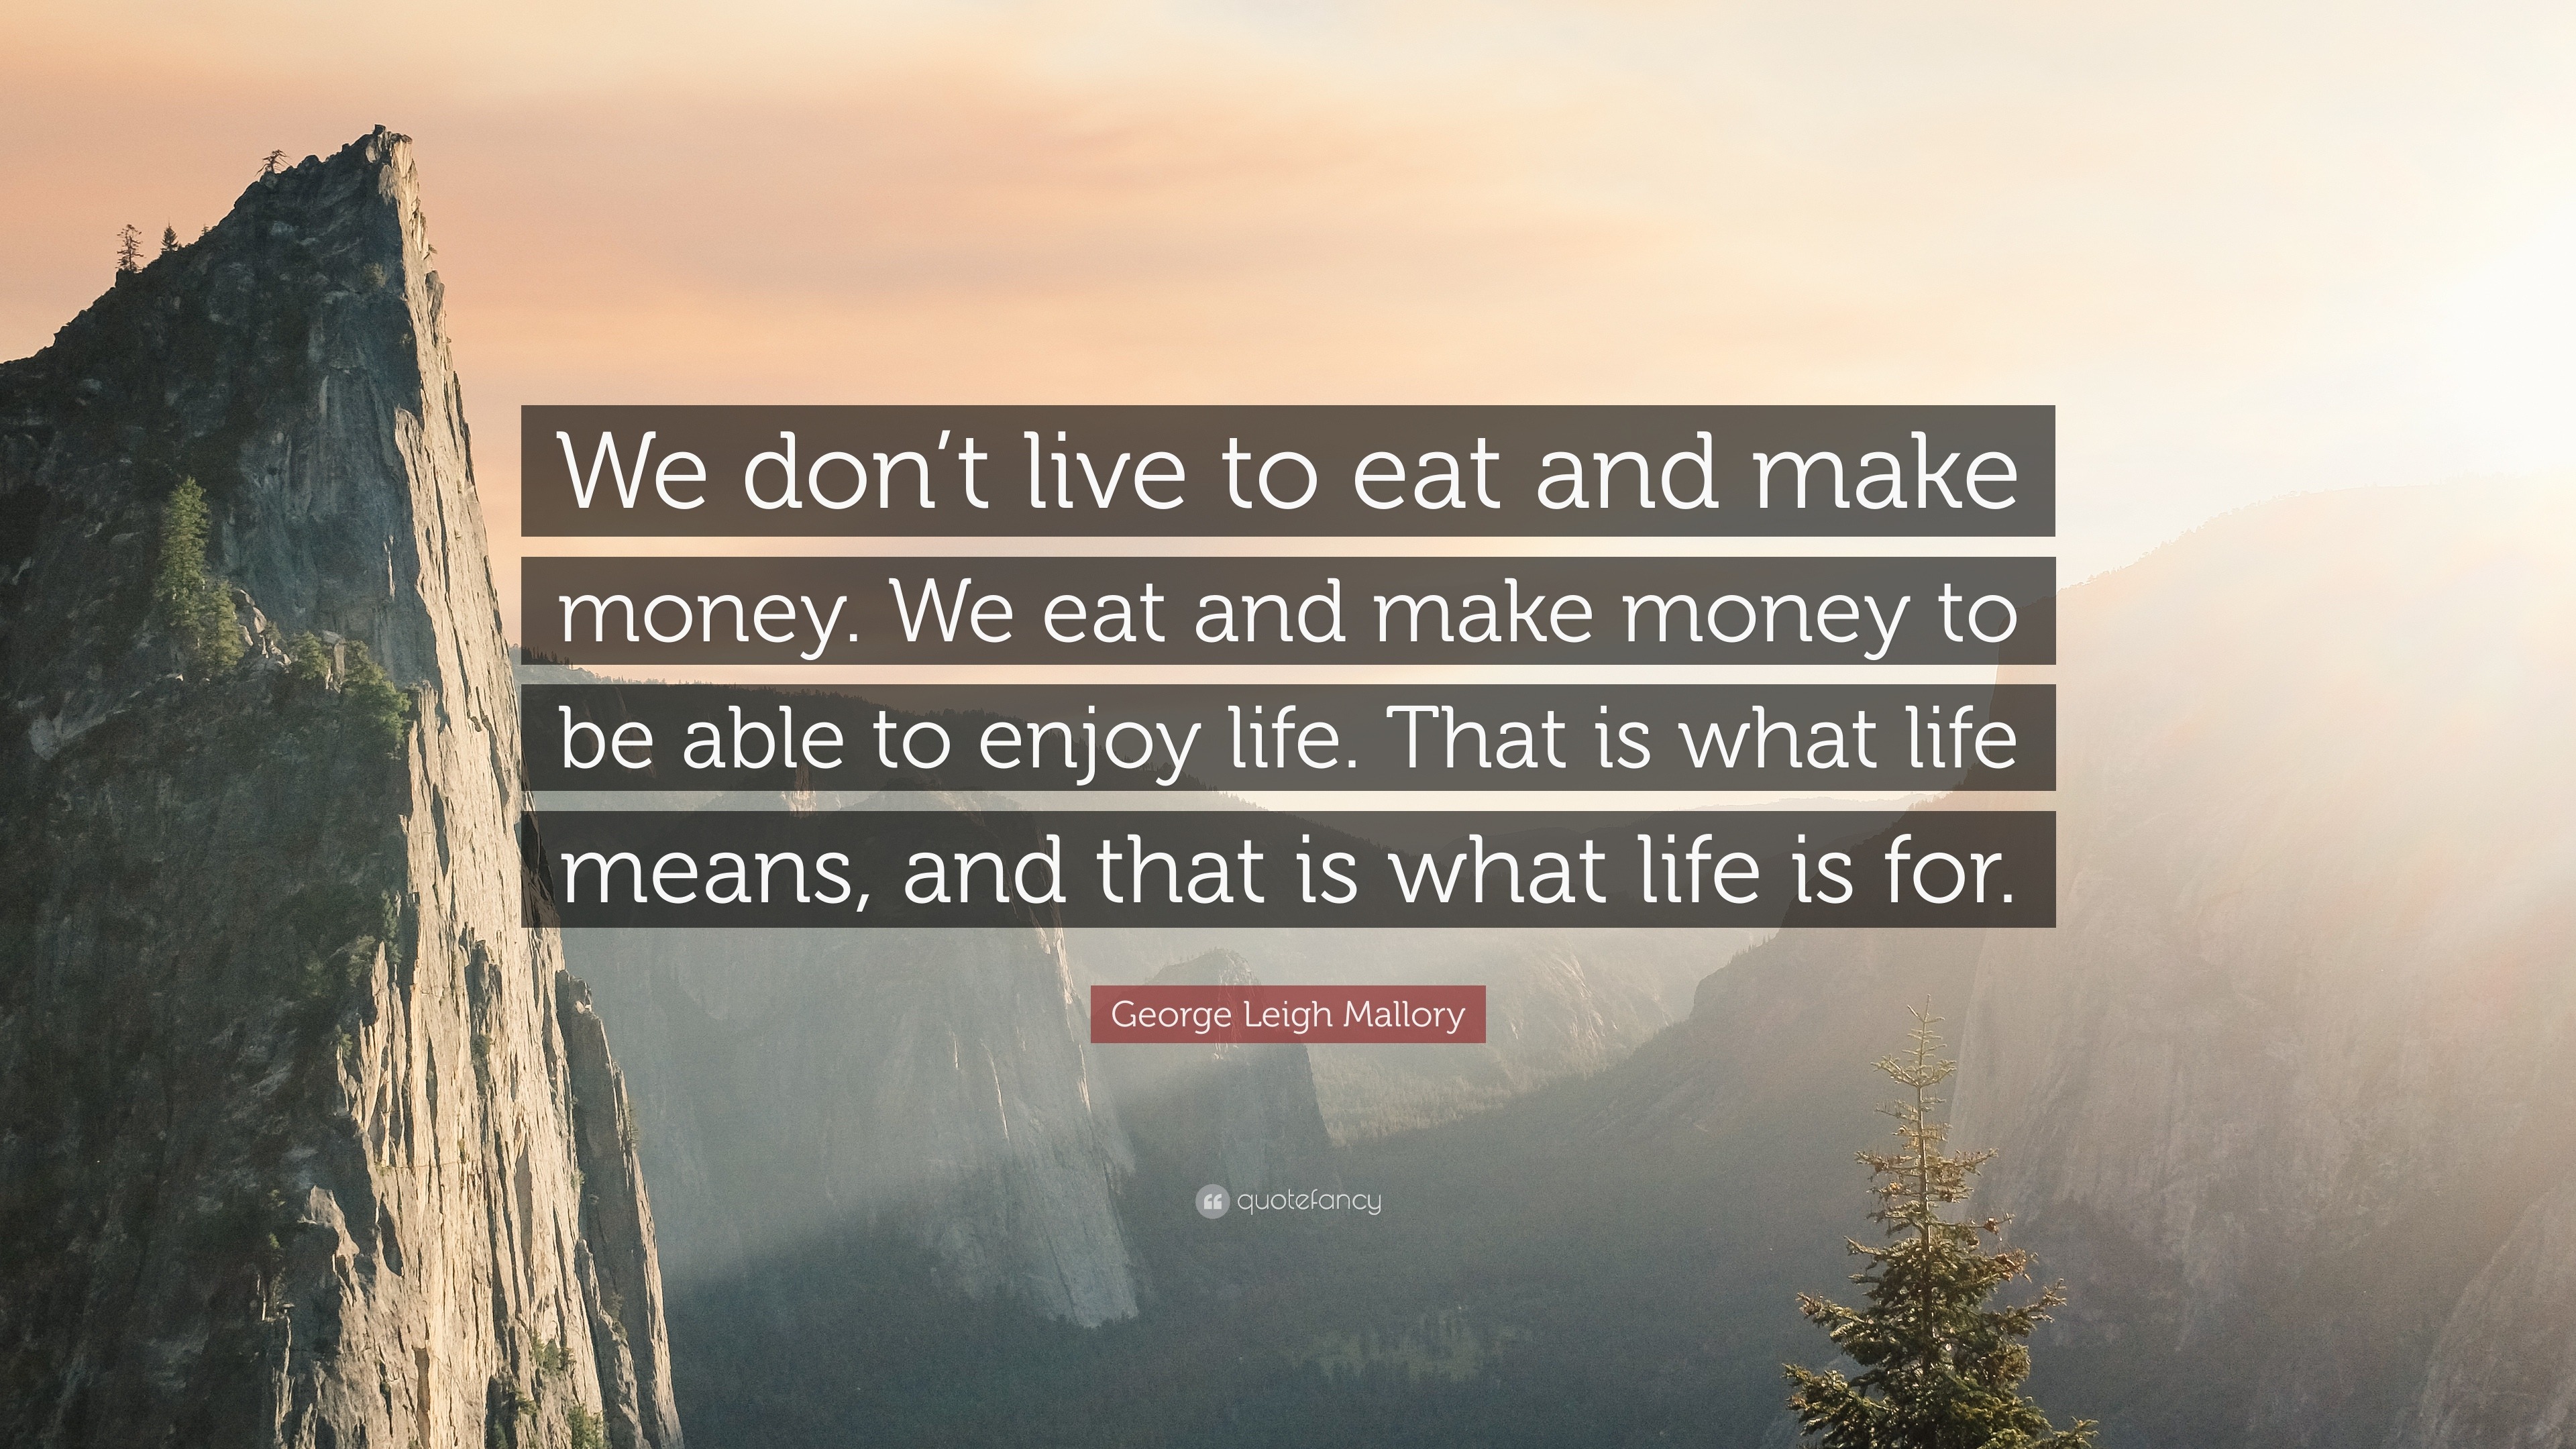 George Leigh Mallory Quote “We don t live to eat and make money